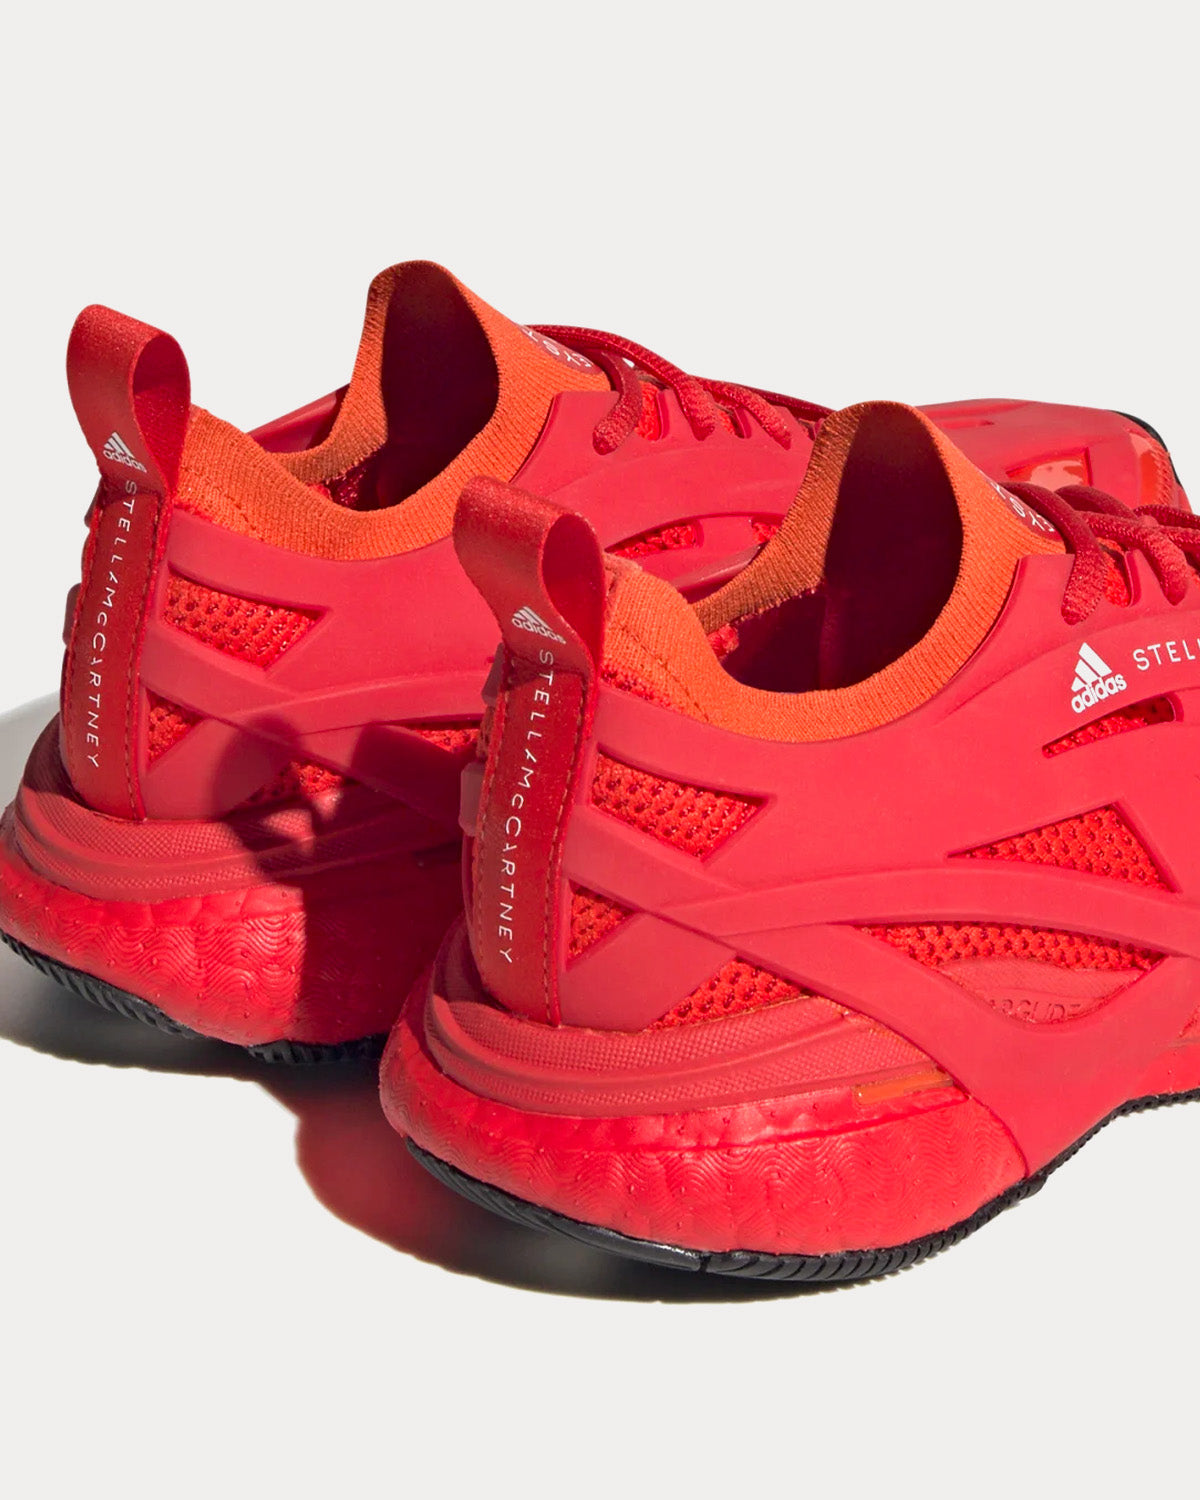 Adidas X Stella McCartney - Solarglide Active Red / Active Orange / Active Red Running Shoes